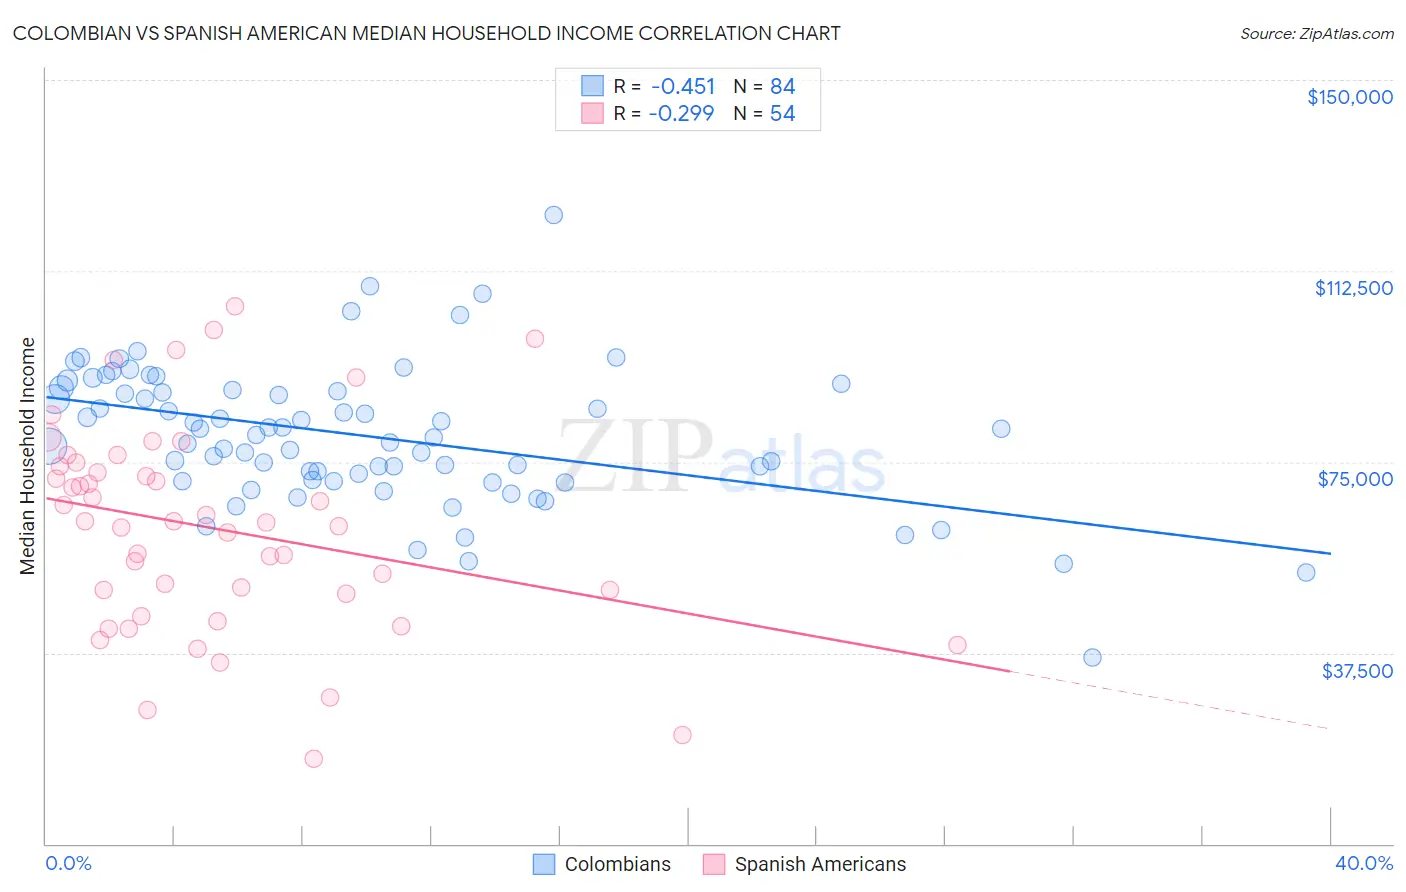 Colombian vs Spanish American Median Household Income